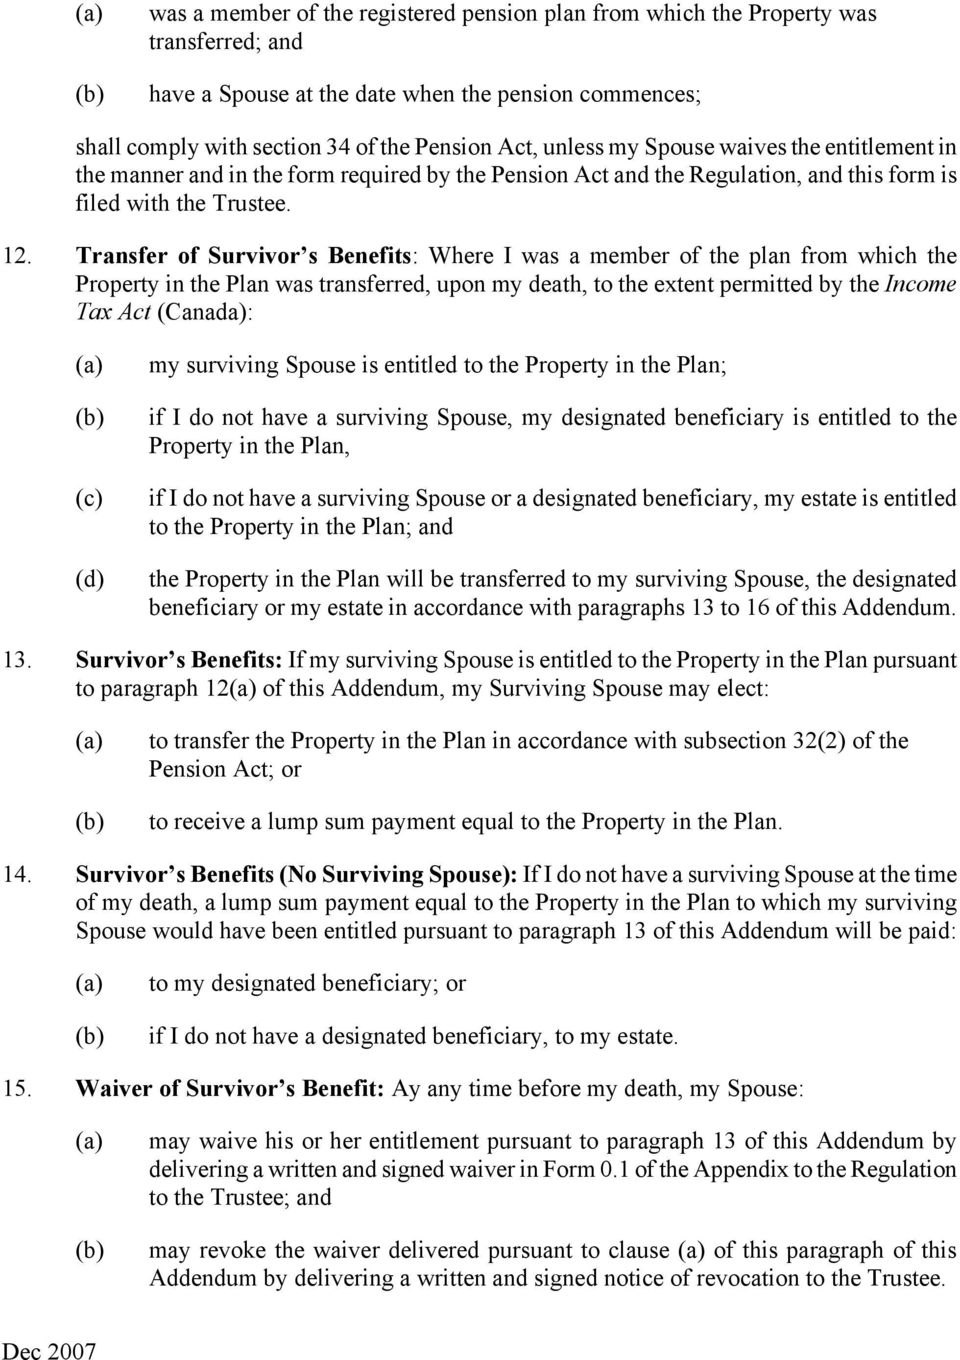 Transfer of Survivor s Benefits: Where I was a member of the plan from which the Property in the Plan was transferred, upon my death, to the extent permitted by the Income Tax Act (Canada): (d) my